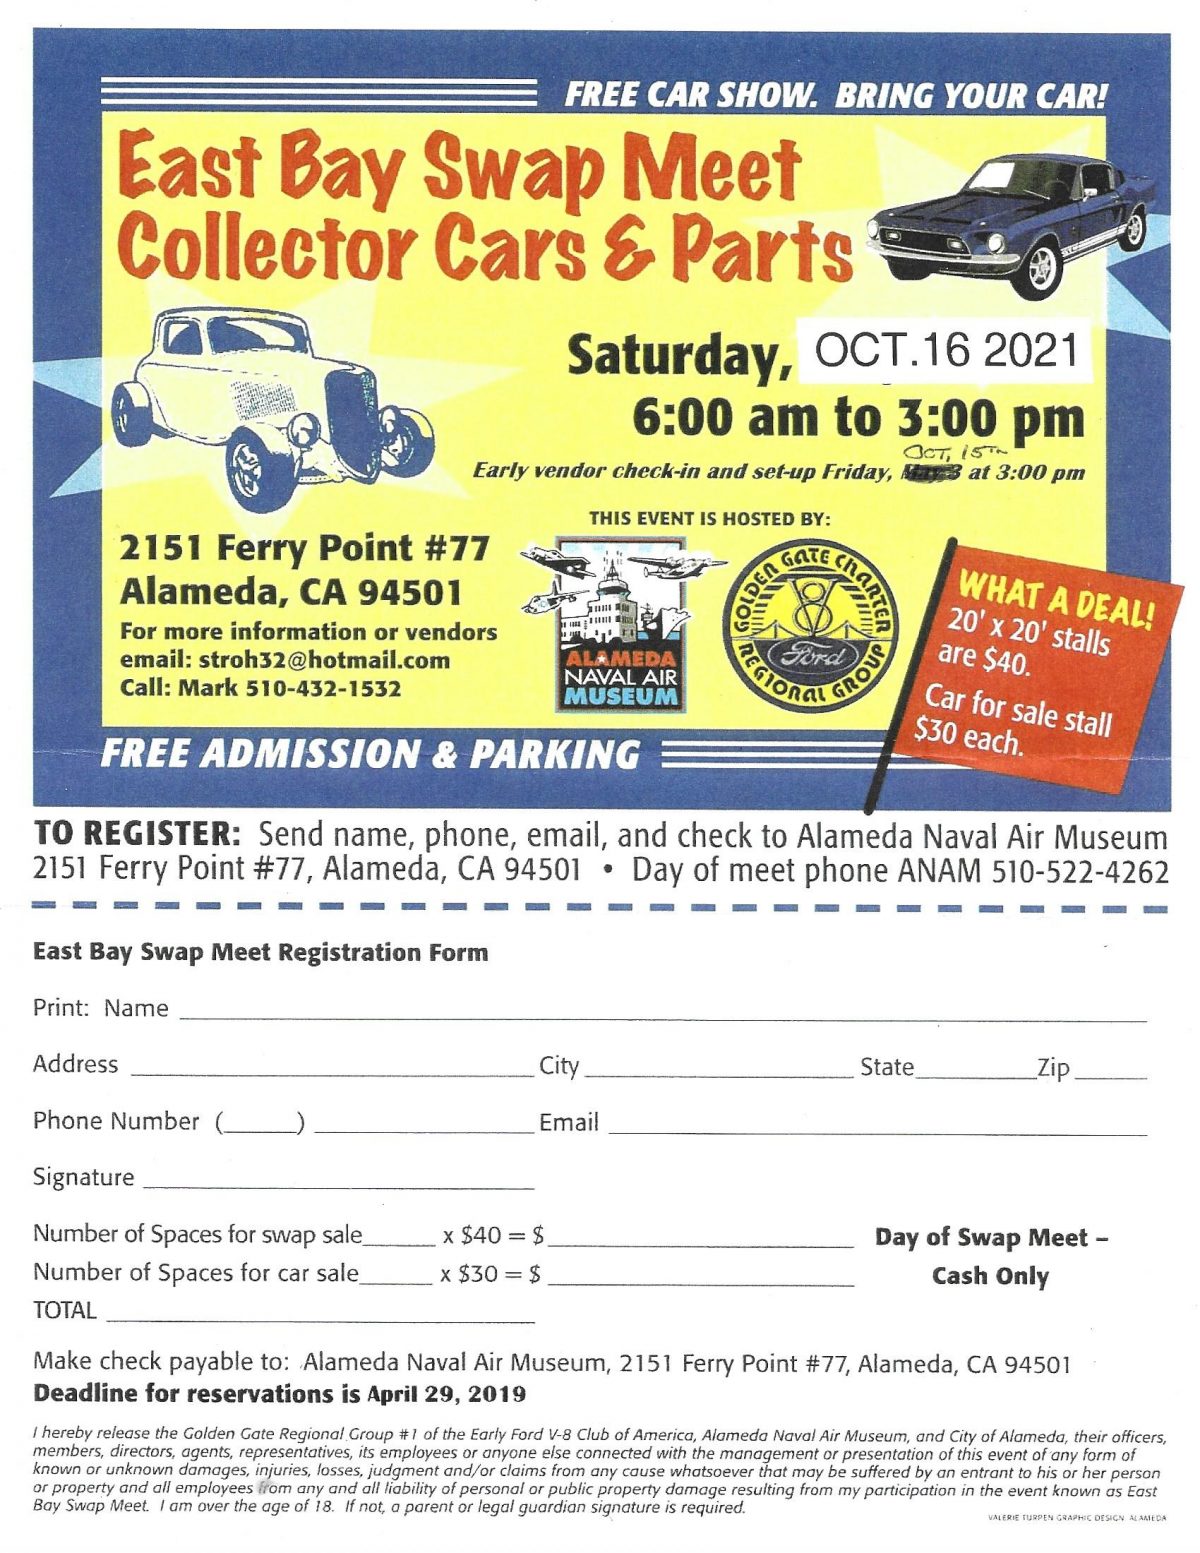 East Bay Swap Meet – Collector Cars & Parts